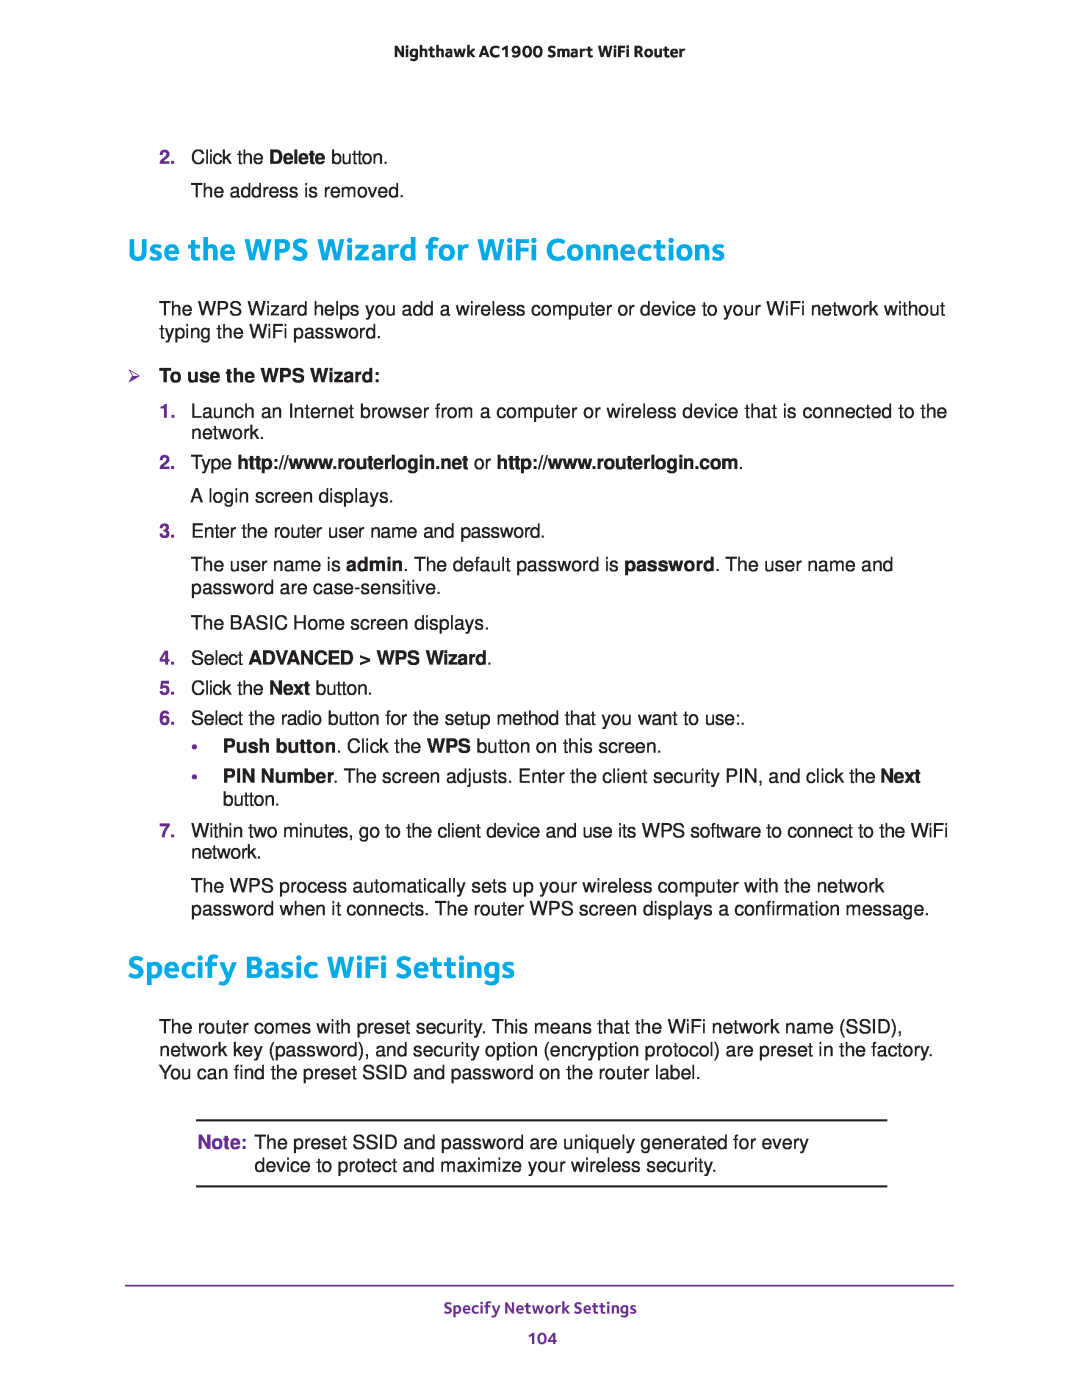 NETGEAR Model R7000 Use the WPS Wizard for WiFi Connections, Specify Basic WiFi Settings,  To use the WPS Wizard 